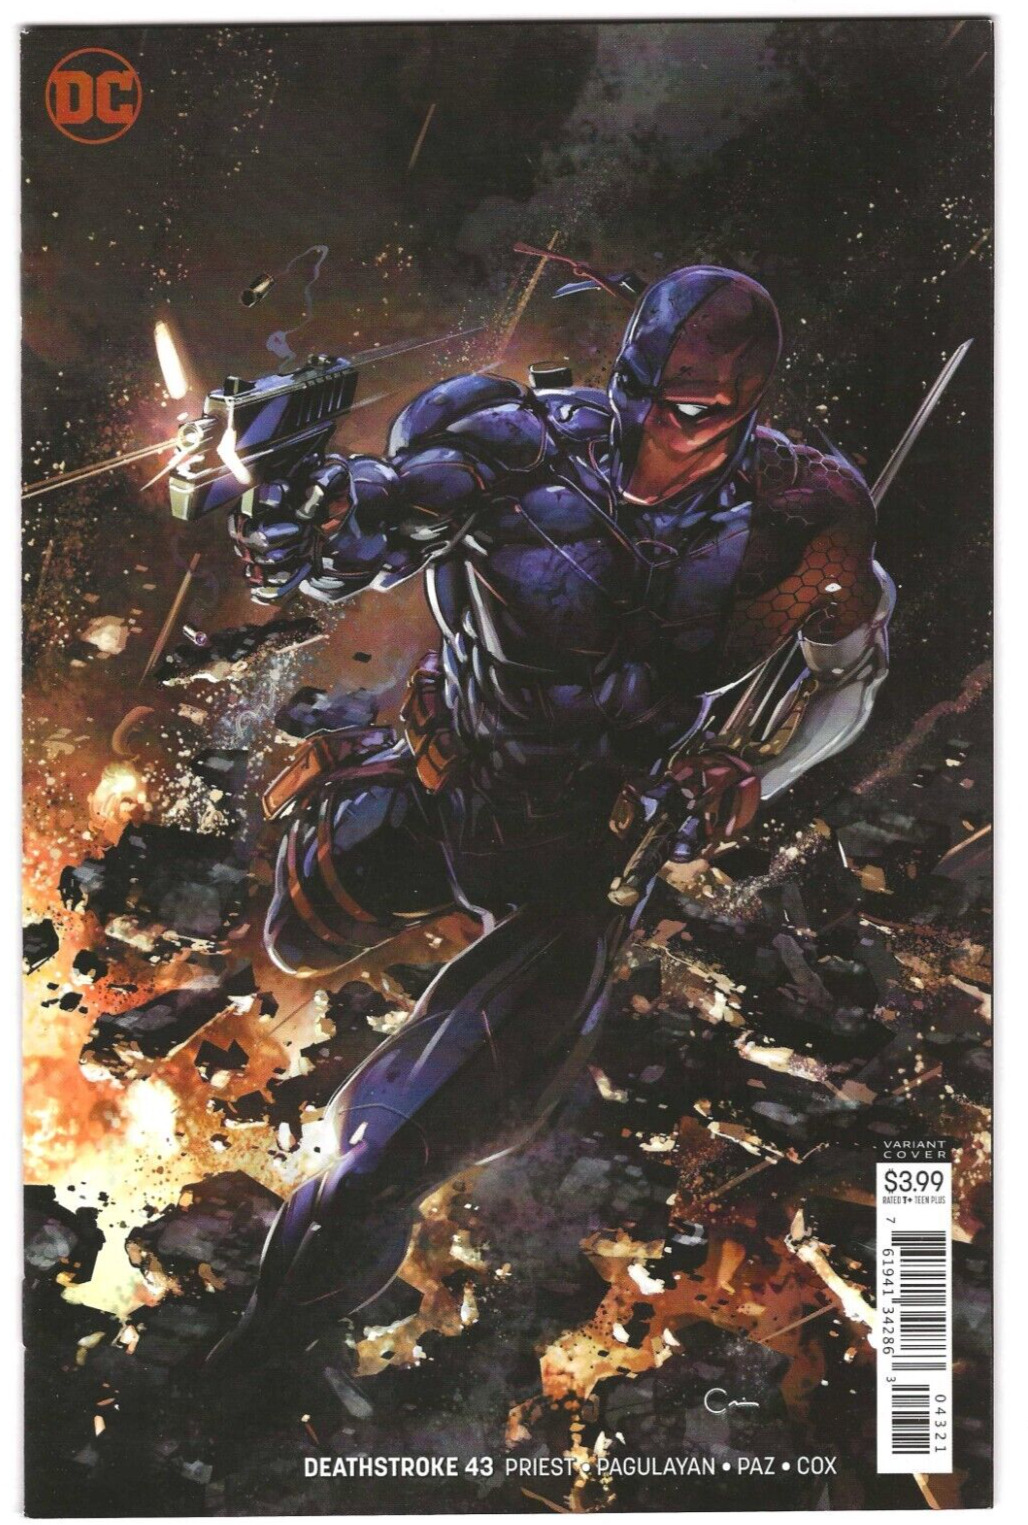 DC Comics DEATHSTROKE #43 first printing cover B